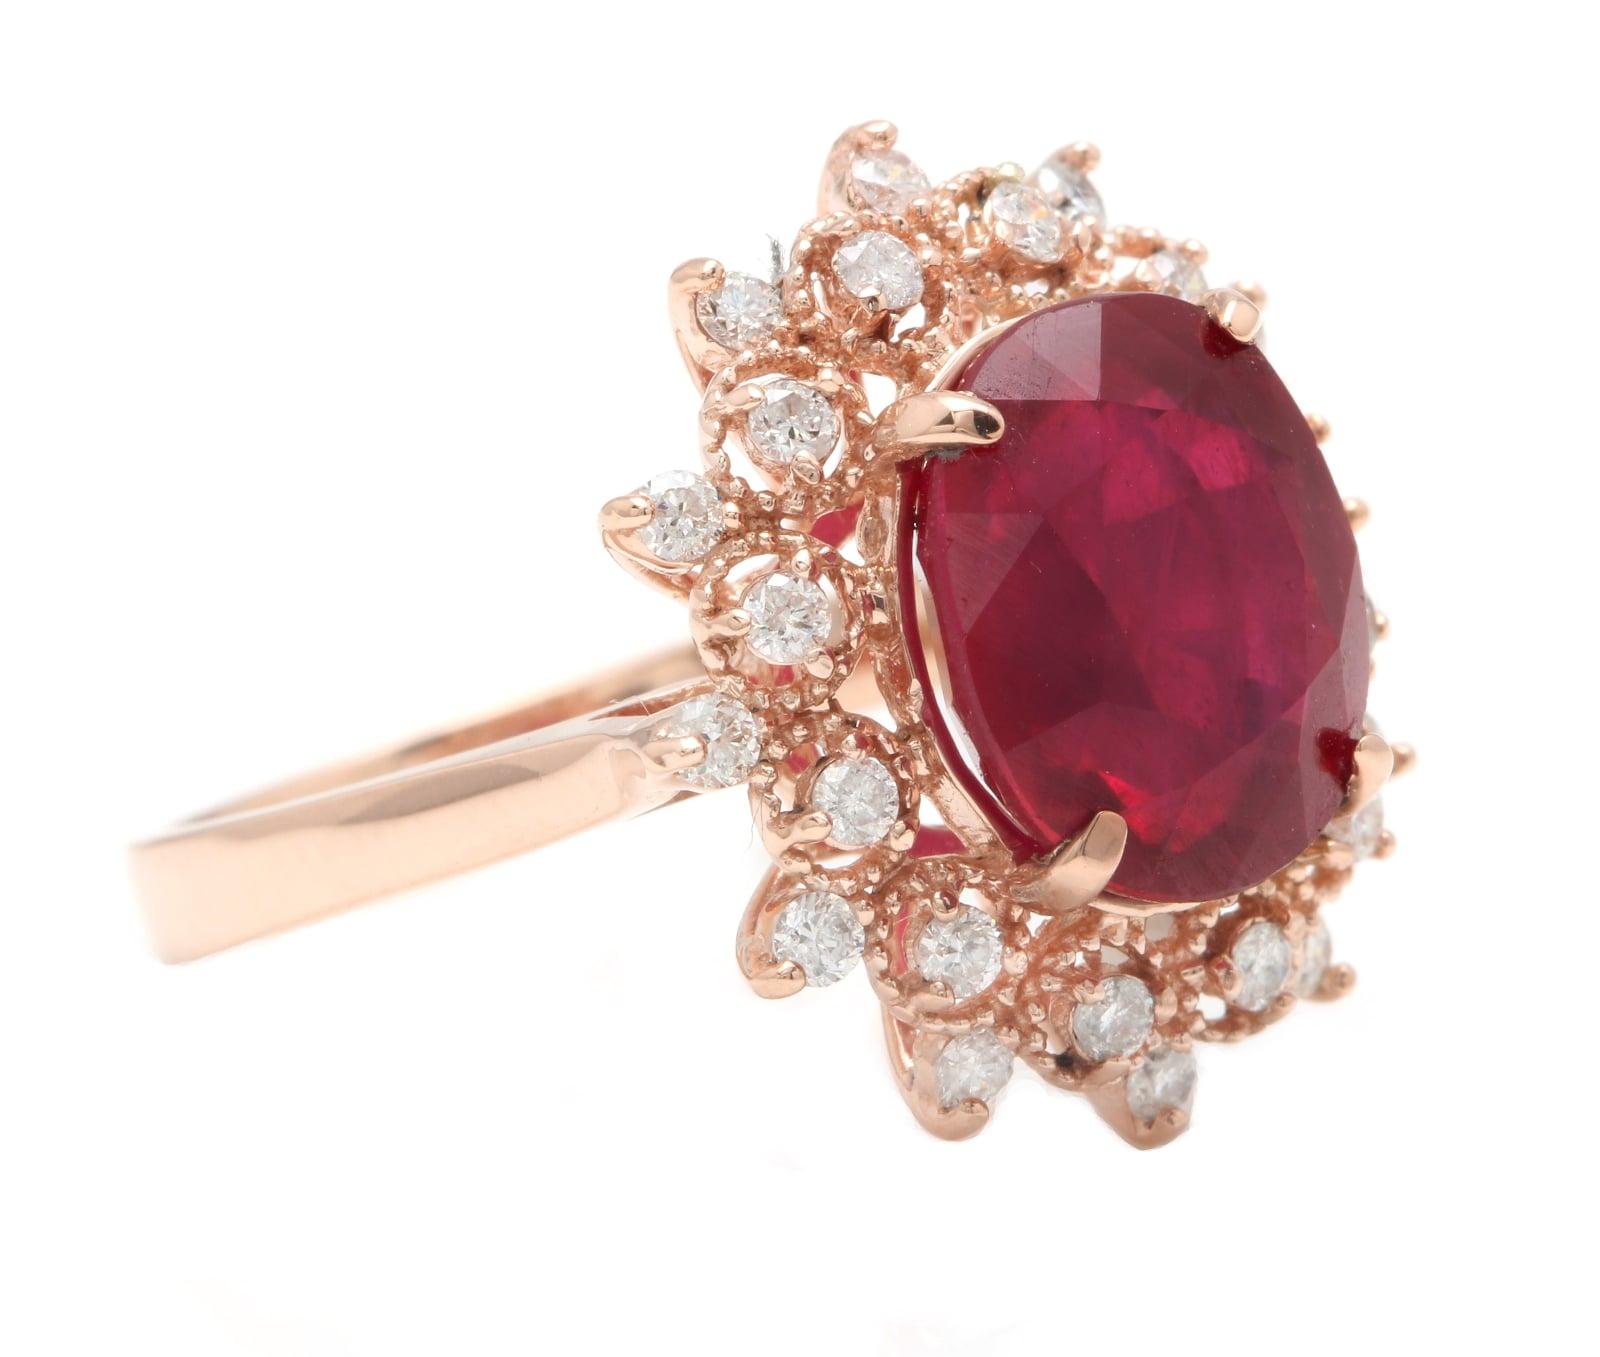 6.60 Carats Impressive Red Ruby and Diamond 14K Rose Gold Ring

Suggested Replacement Value $4,800.00

Total Red Ruby Weight is: Approx. 6.00 Carats (lead glass filled)

Ruby Measures: 11 x 9mm 

Natural Round Diamonds Weight: Approx. 0.60 Carats